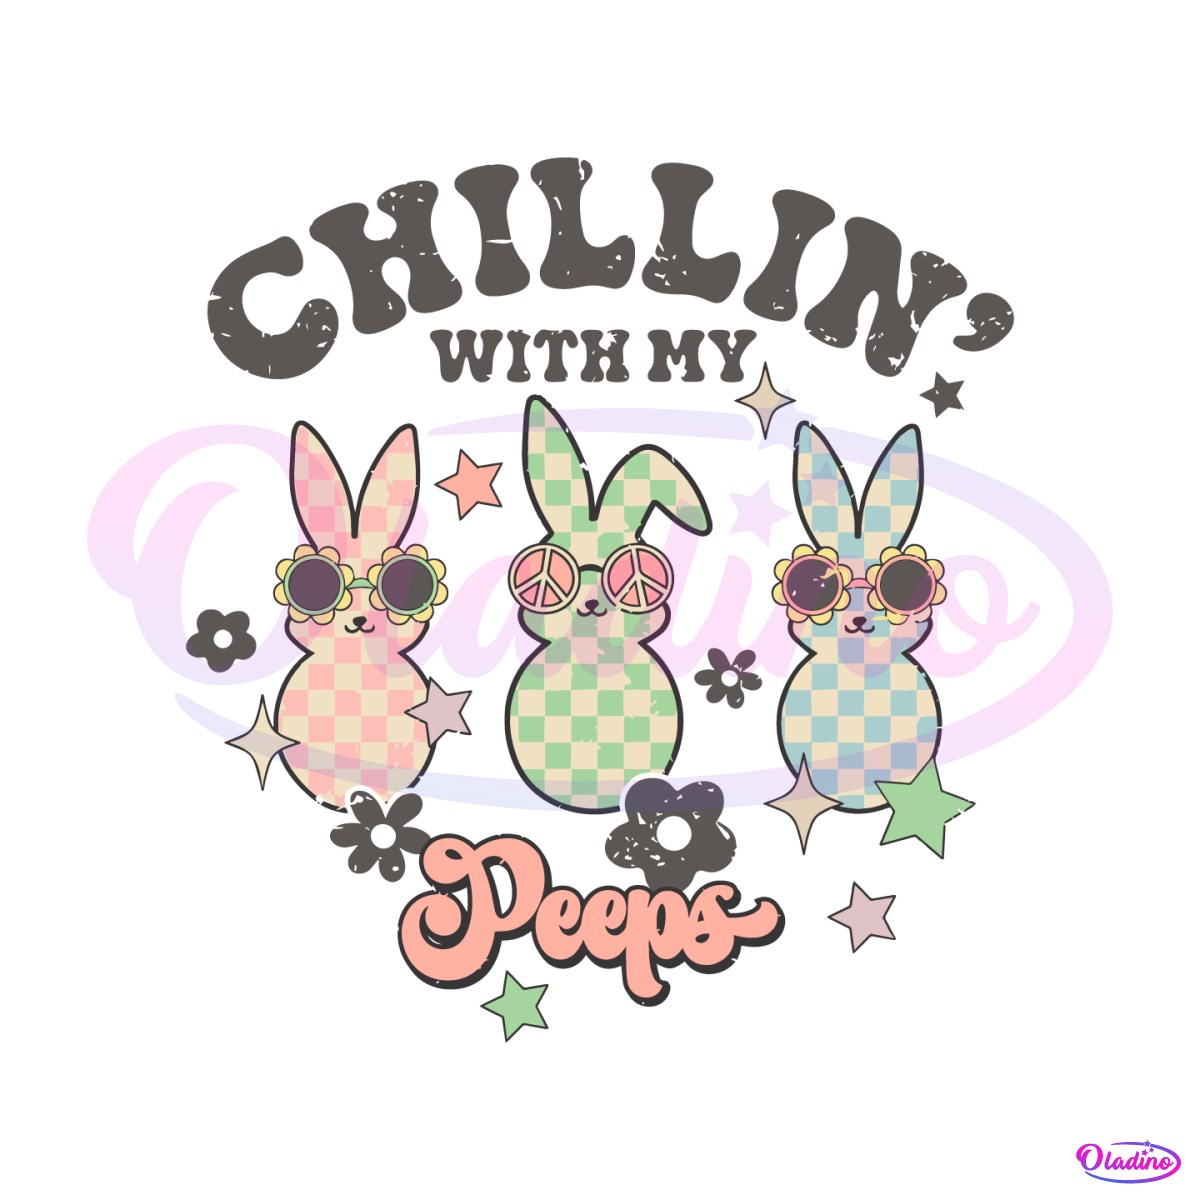 easter-chillin-with-my-peeps-svg